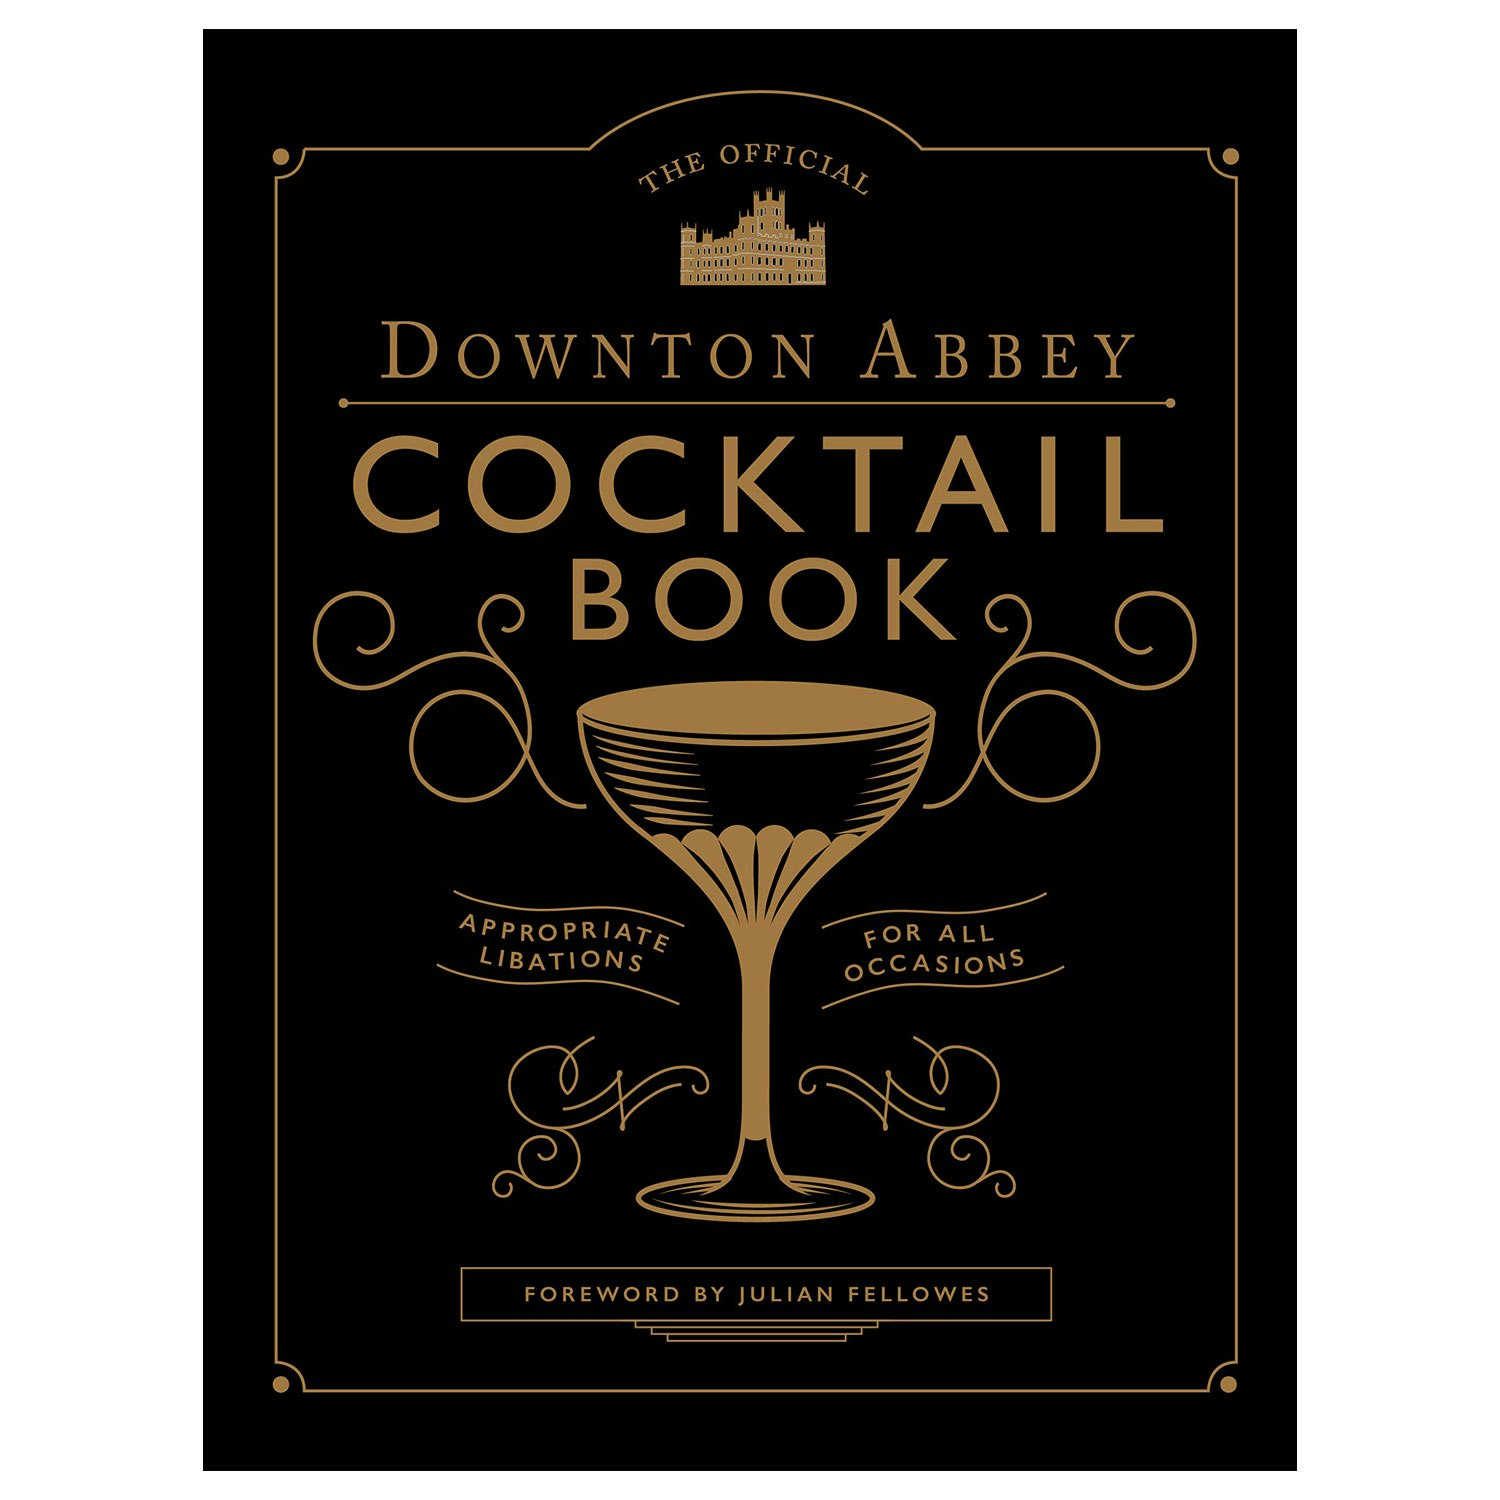 Downtown Abbey Cocktail Book - New Mags @ RoyalDesign